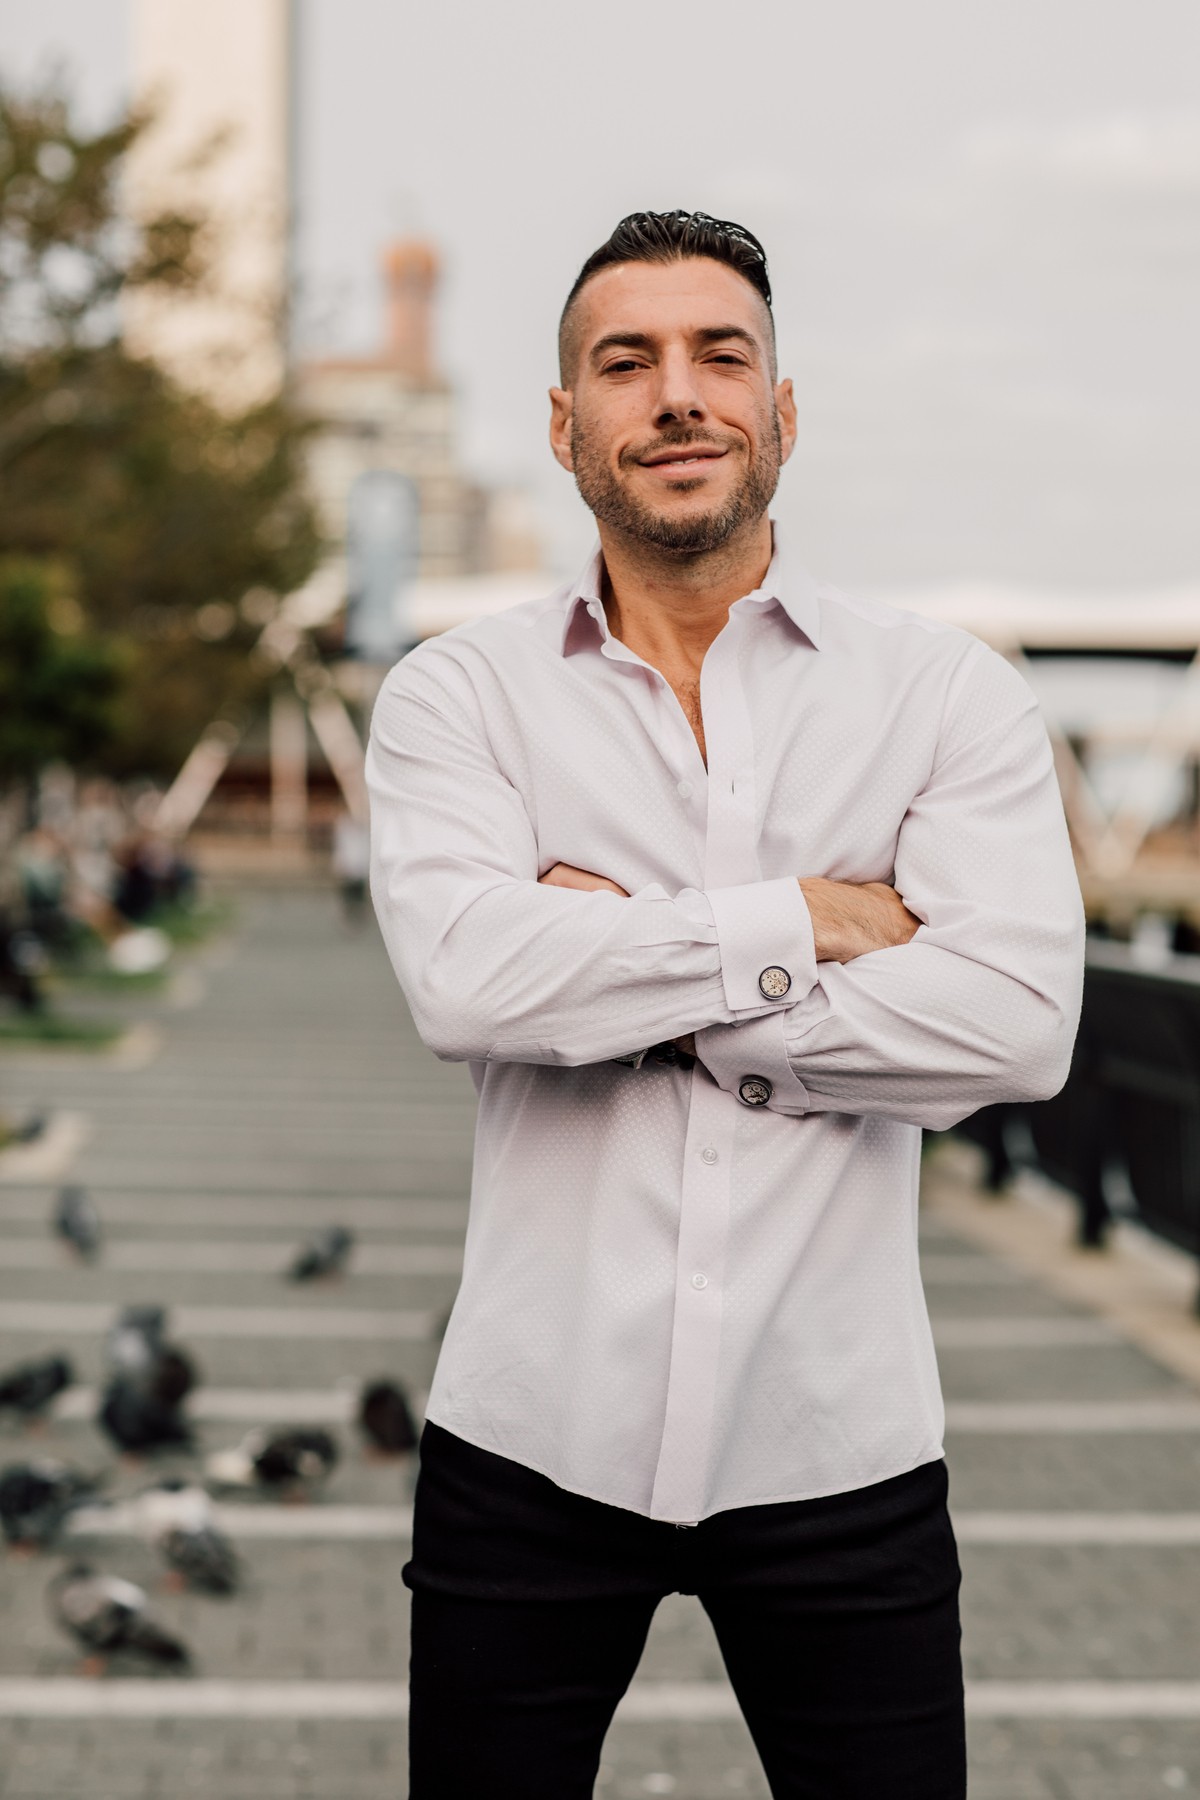 Craig Siegel is a motivational speaker and the founder of Cultivate Lasting Symphony (CLS). Learn more about Siegel and his practice here.